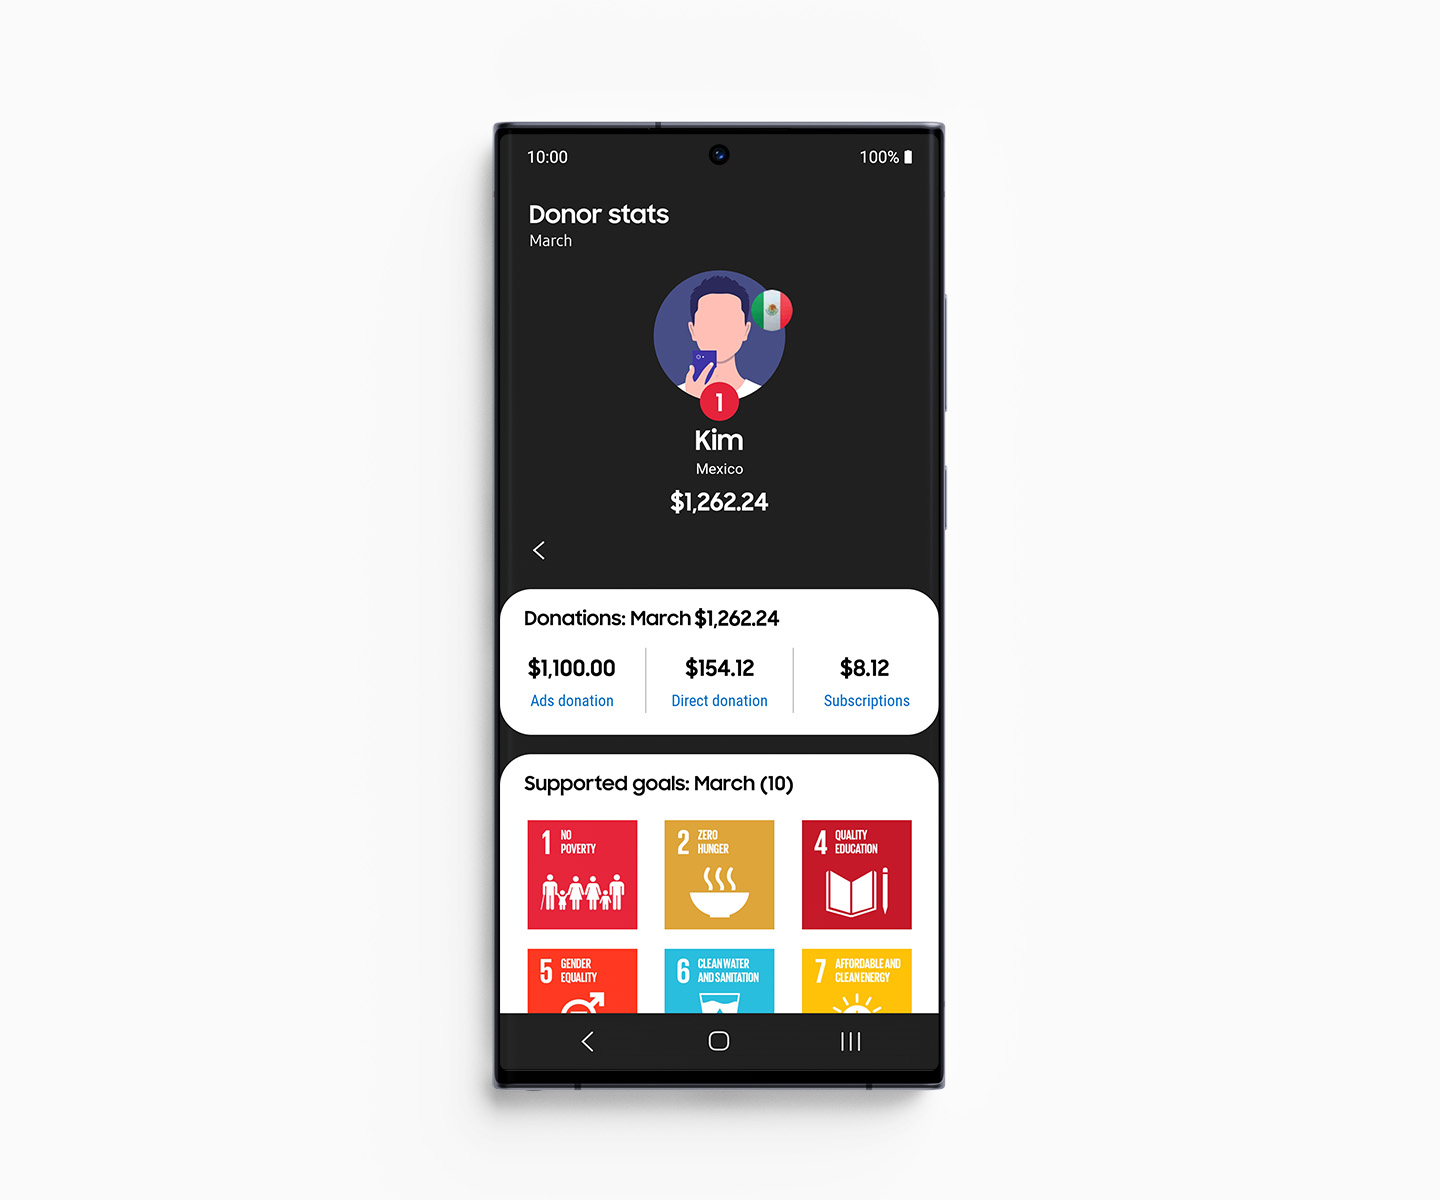 New App Donation Leaderboard Feature of Samsung Global Goals App	